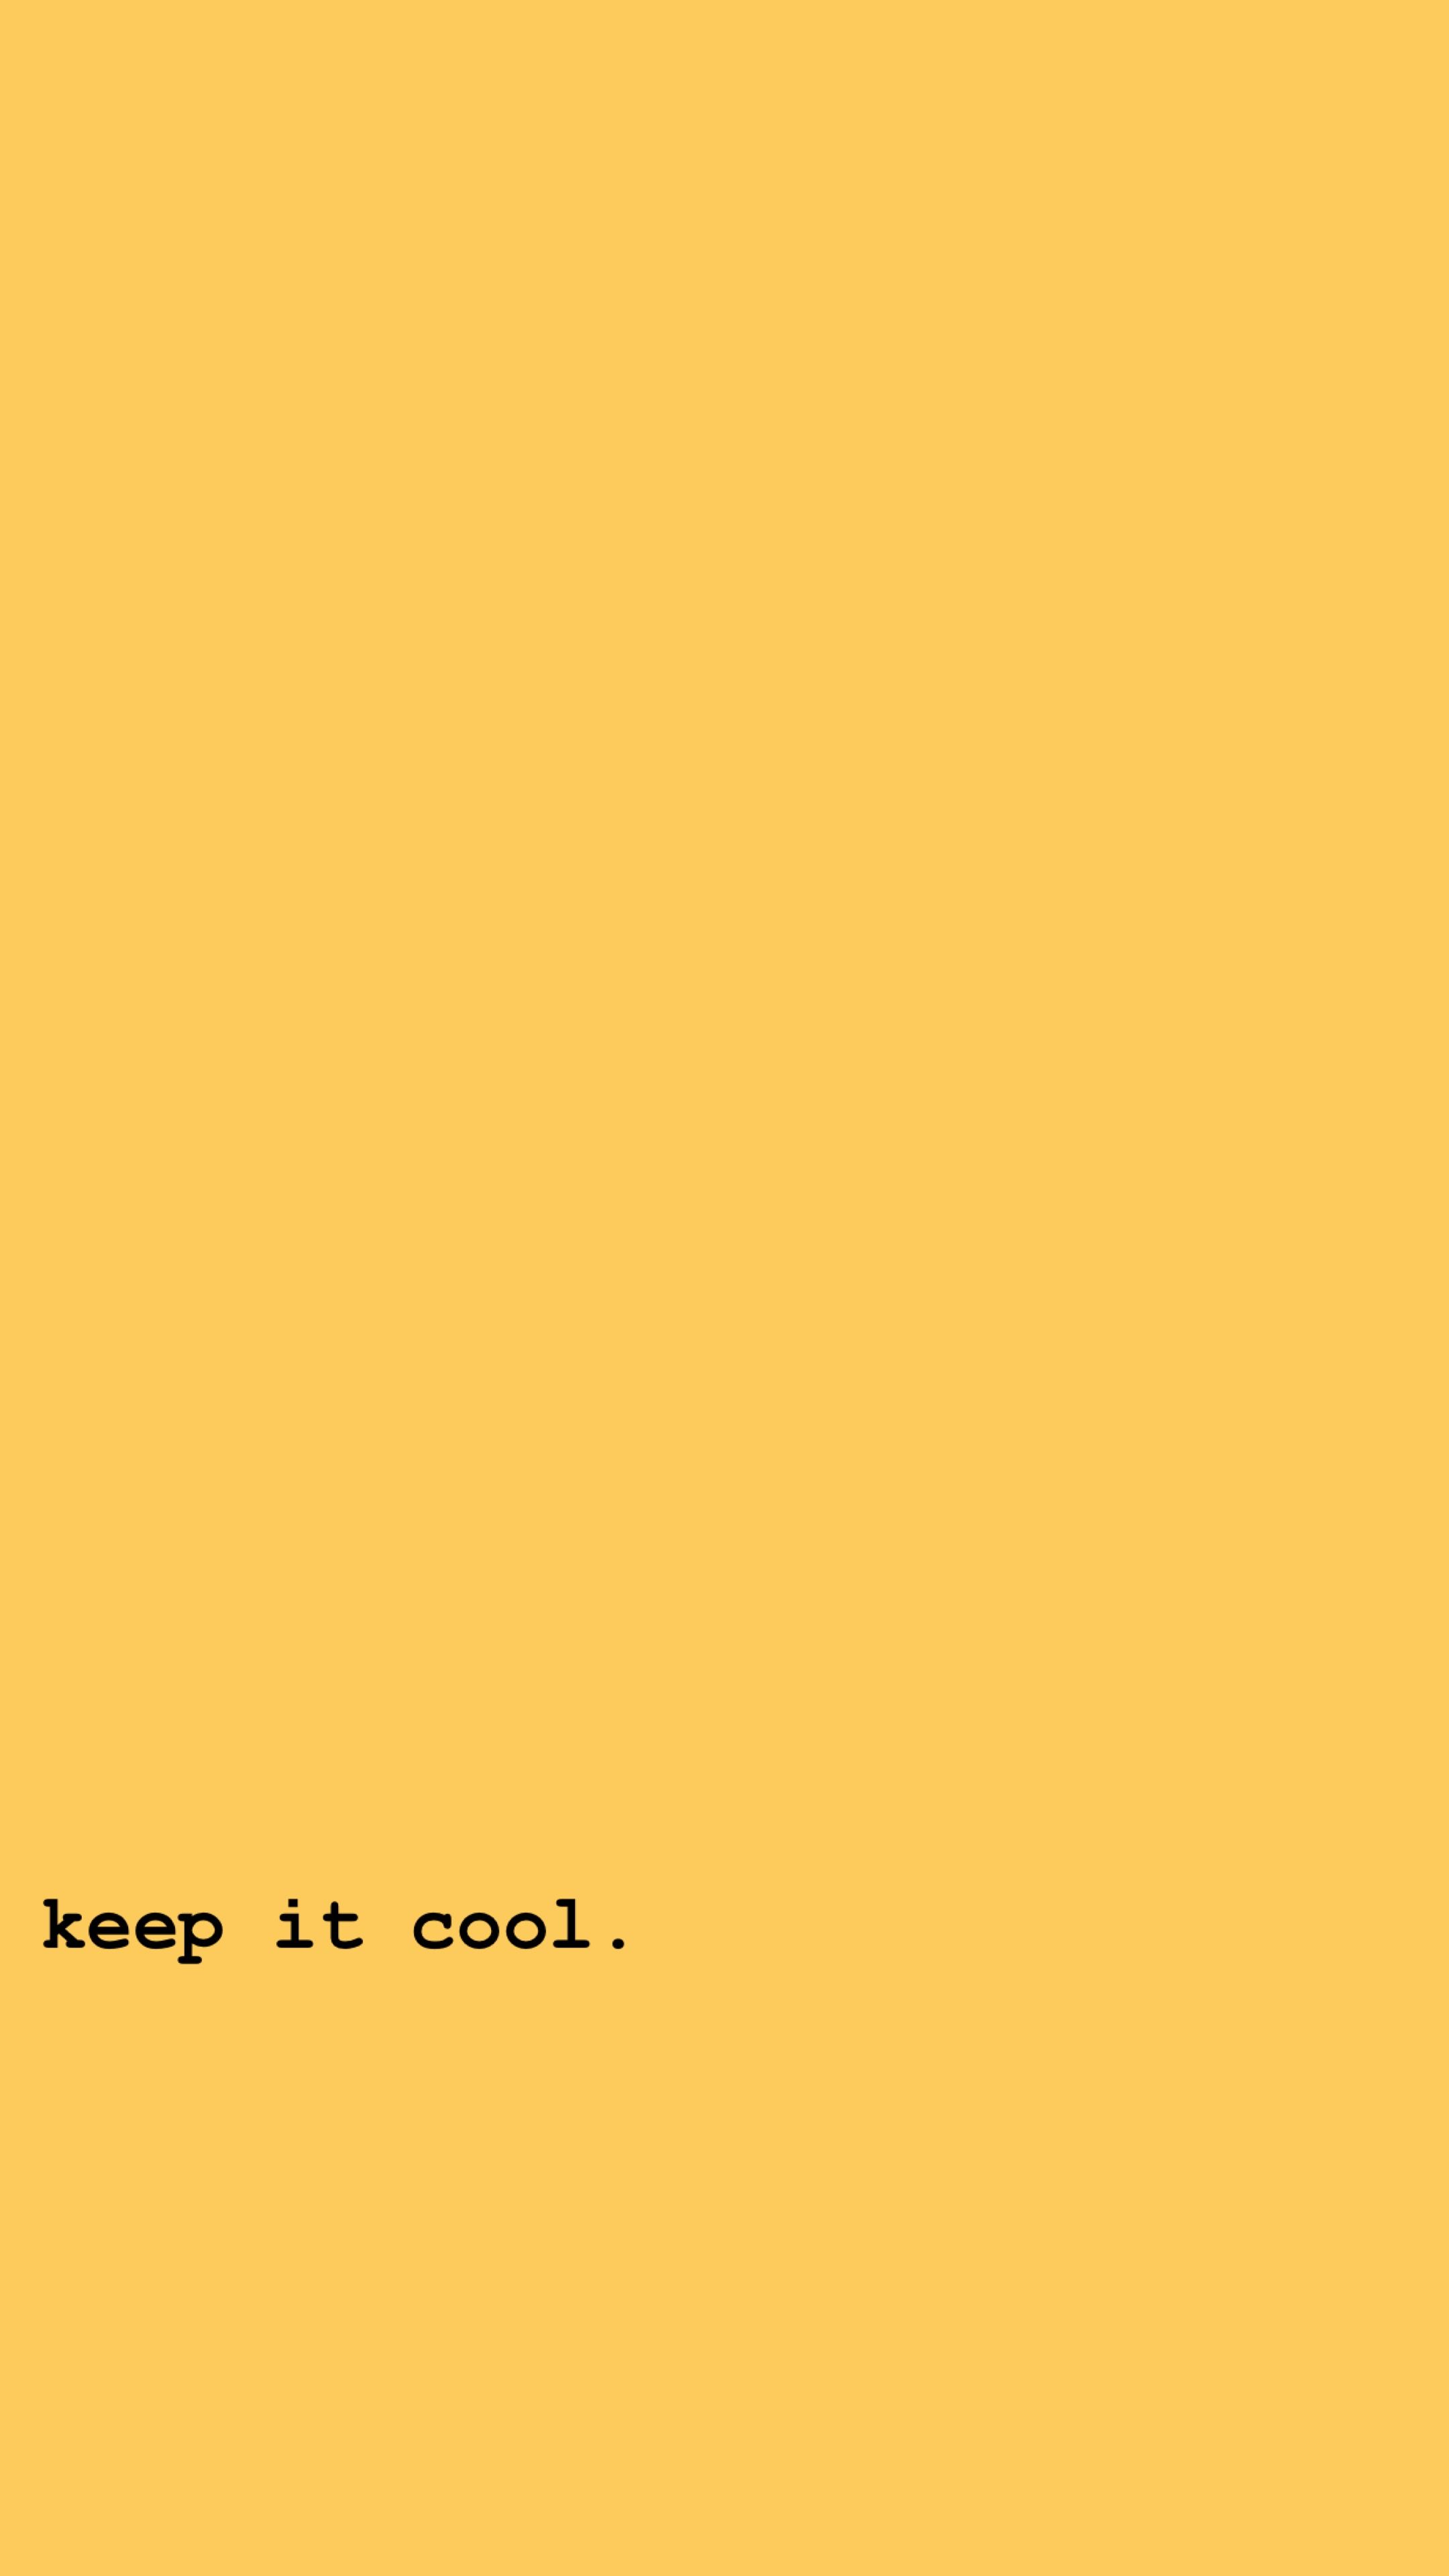 Download Spreading Positivity in this Summer with Cool Yellow Wallpaper   Wallpaperscom